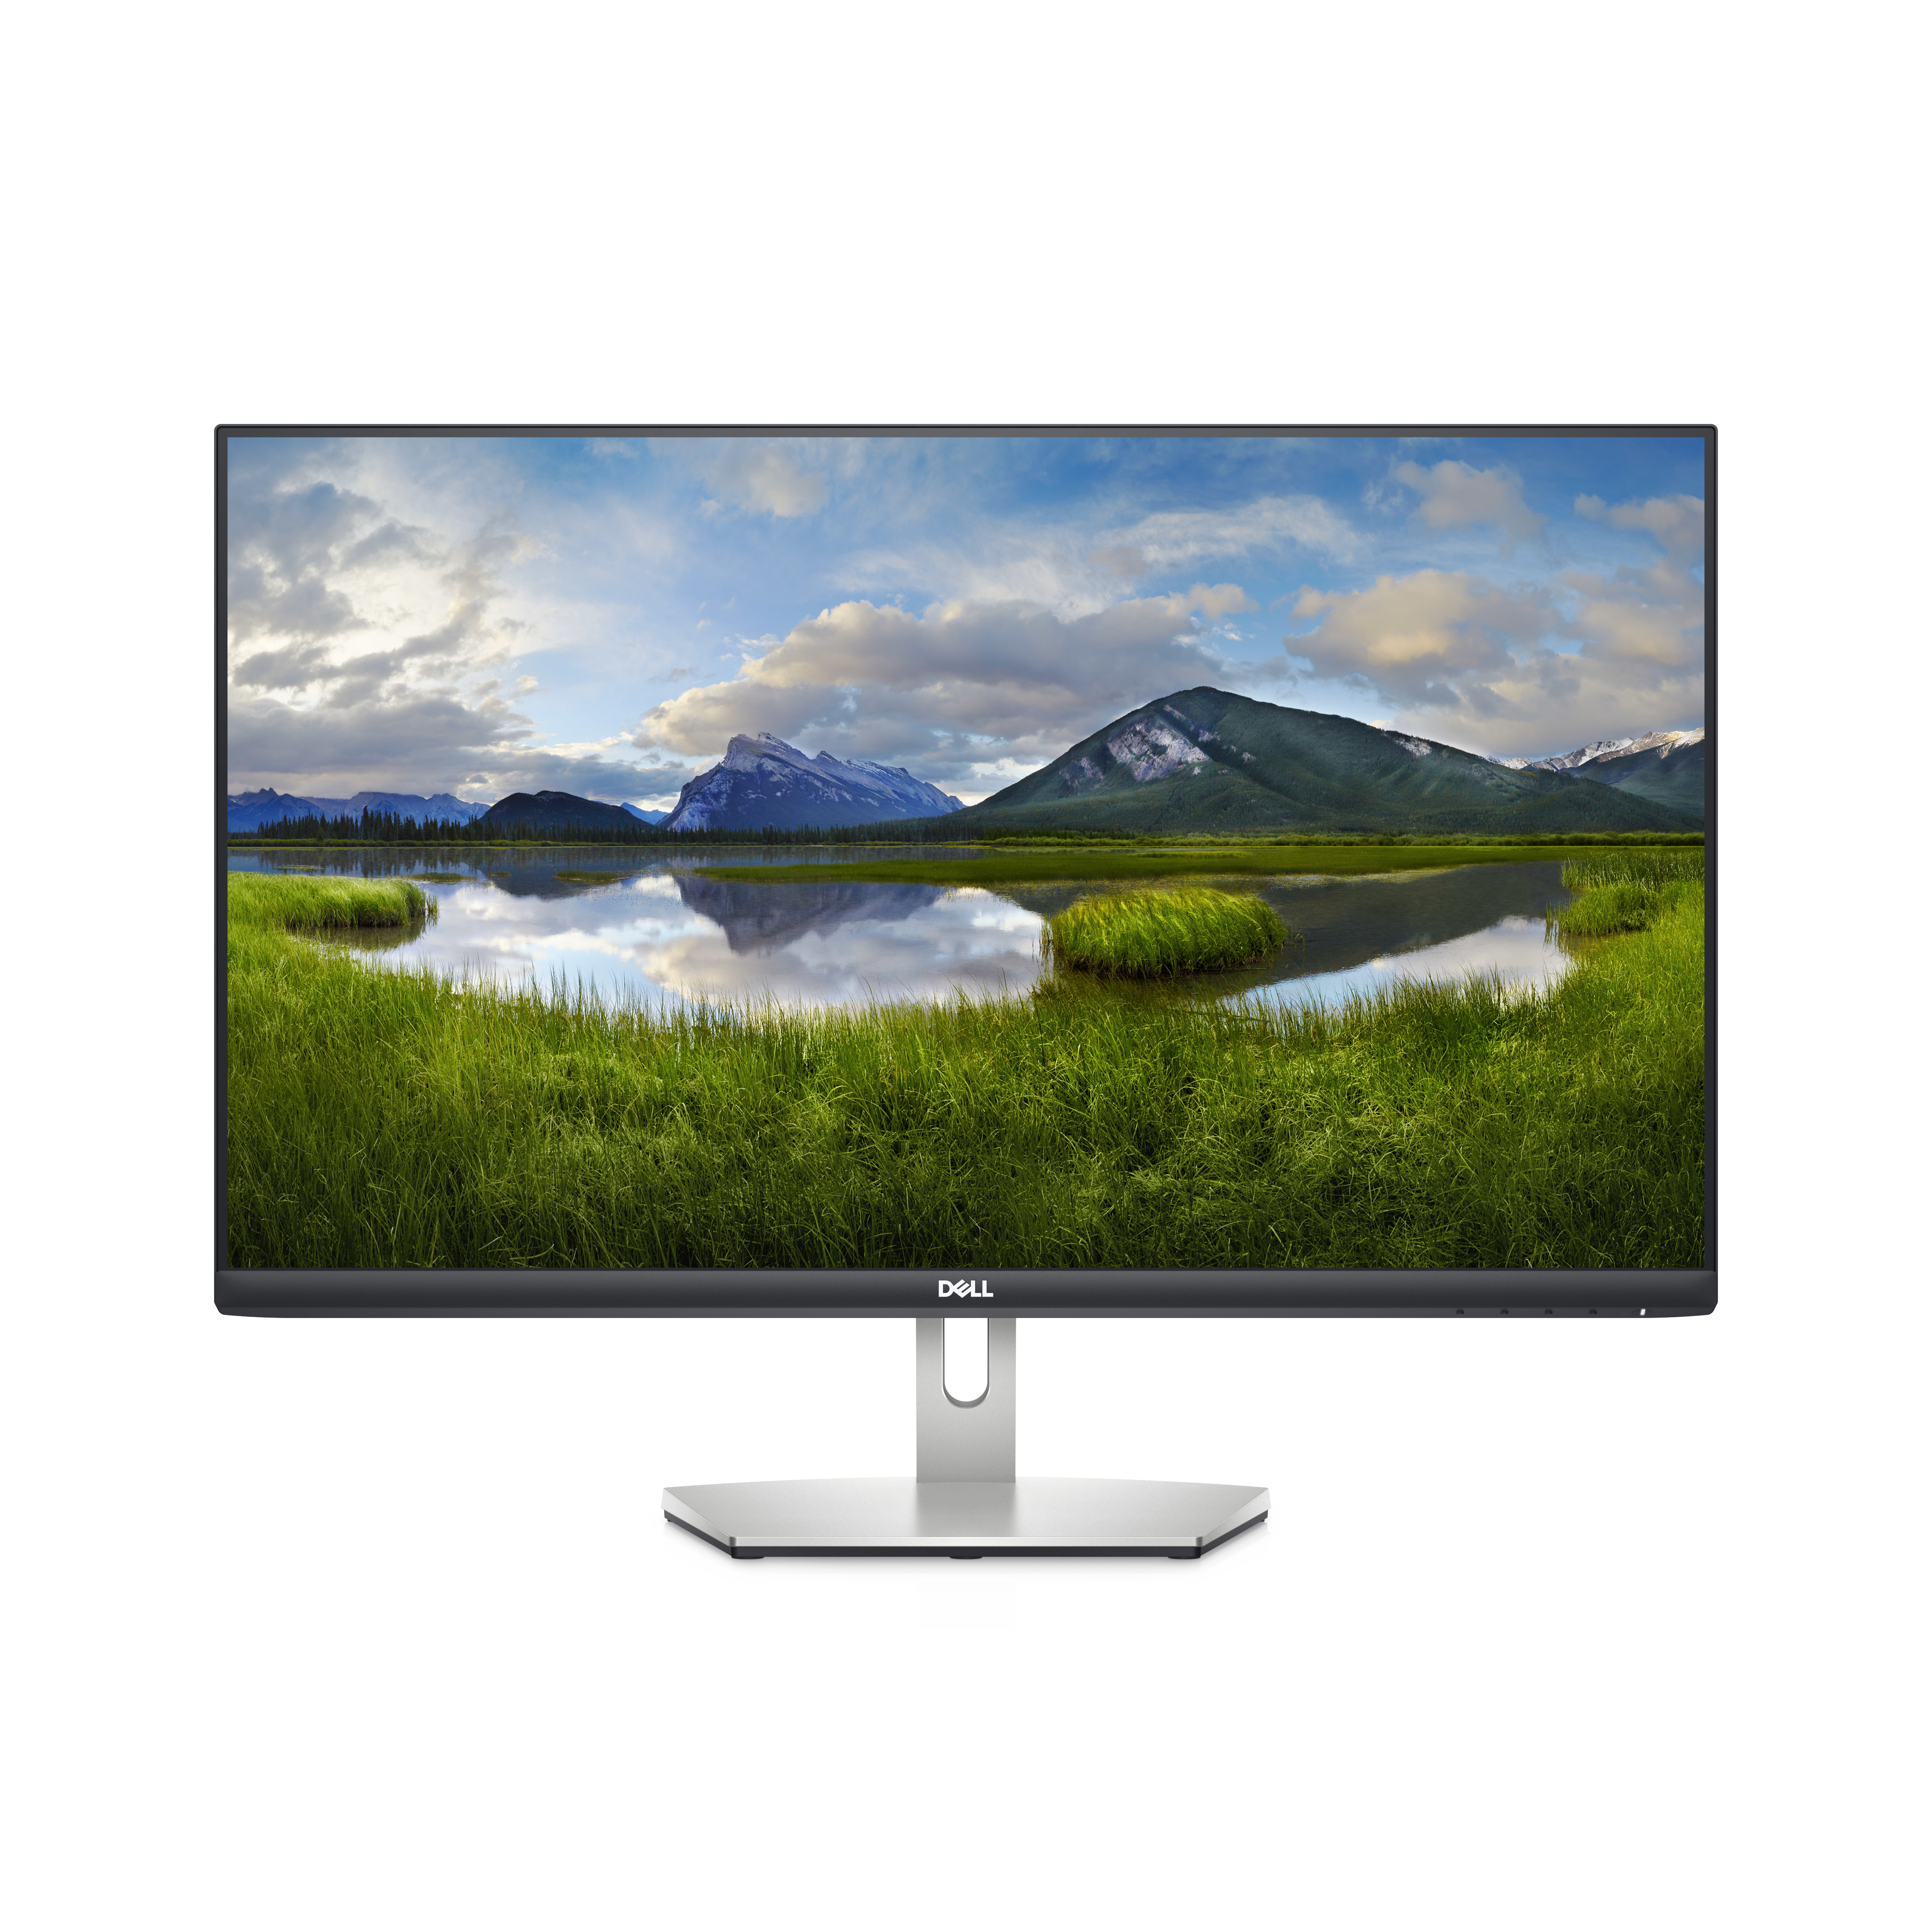 Image of DELL S Series S2721H LED display 68,6 cm (27") 1920 x 1080 Pixel Full HD LCD Grigio